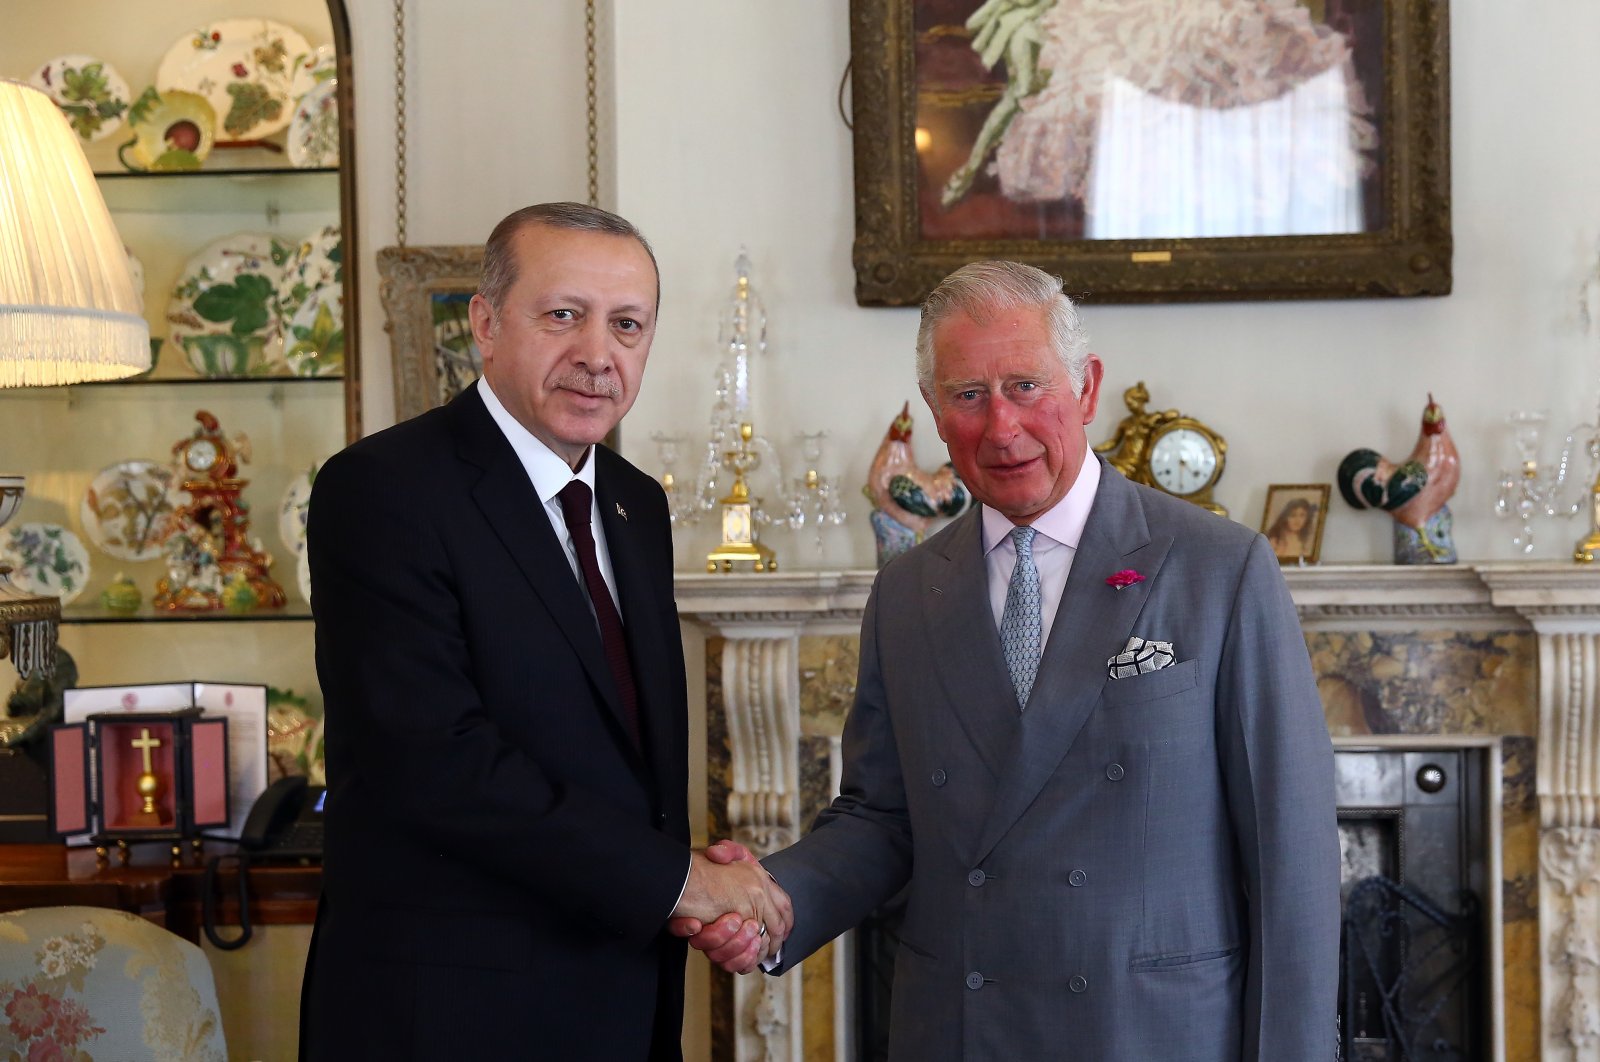 President Recep Tayyip Erdoğan shakes hands with then-Prince Charles at Clarence House, in London, U.K., May 15, 2018. (Sabah File Photo)